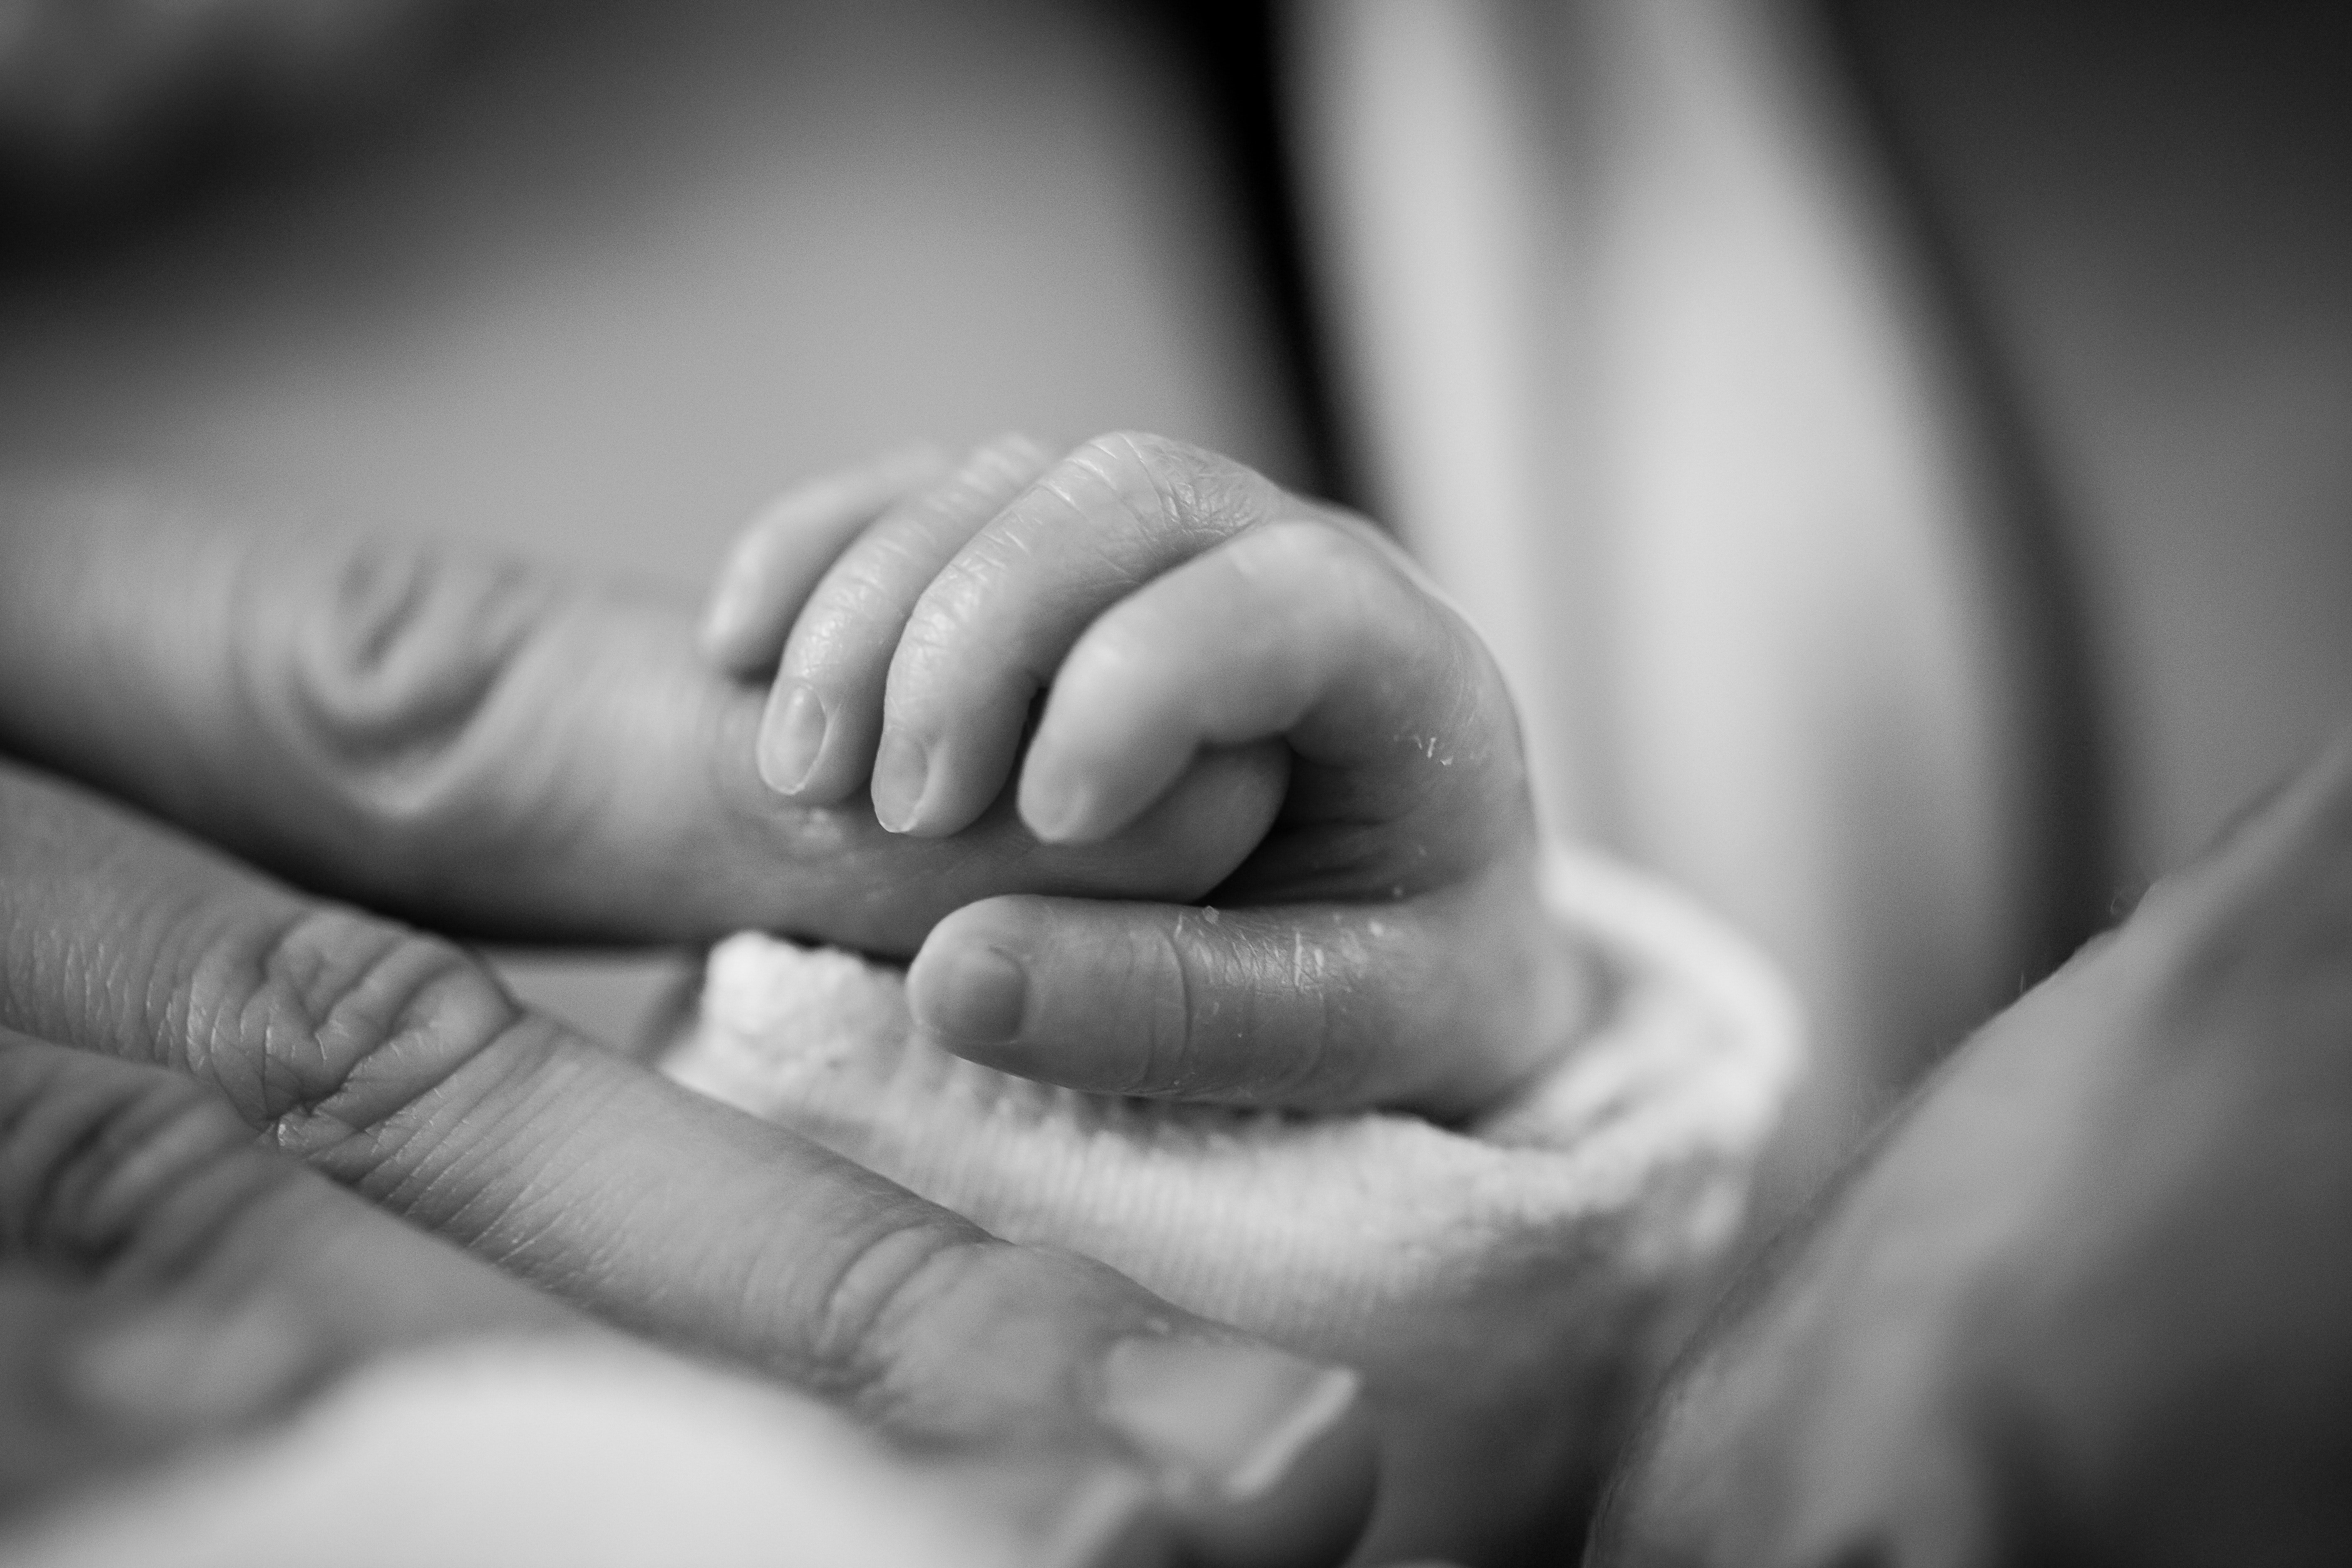 The baby was placed in foster care as the police investigated his mother. | Source: Pexels